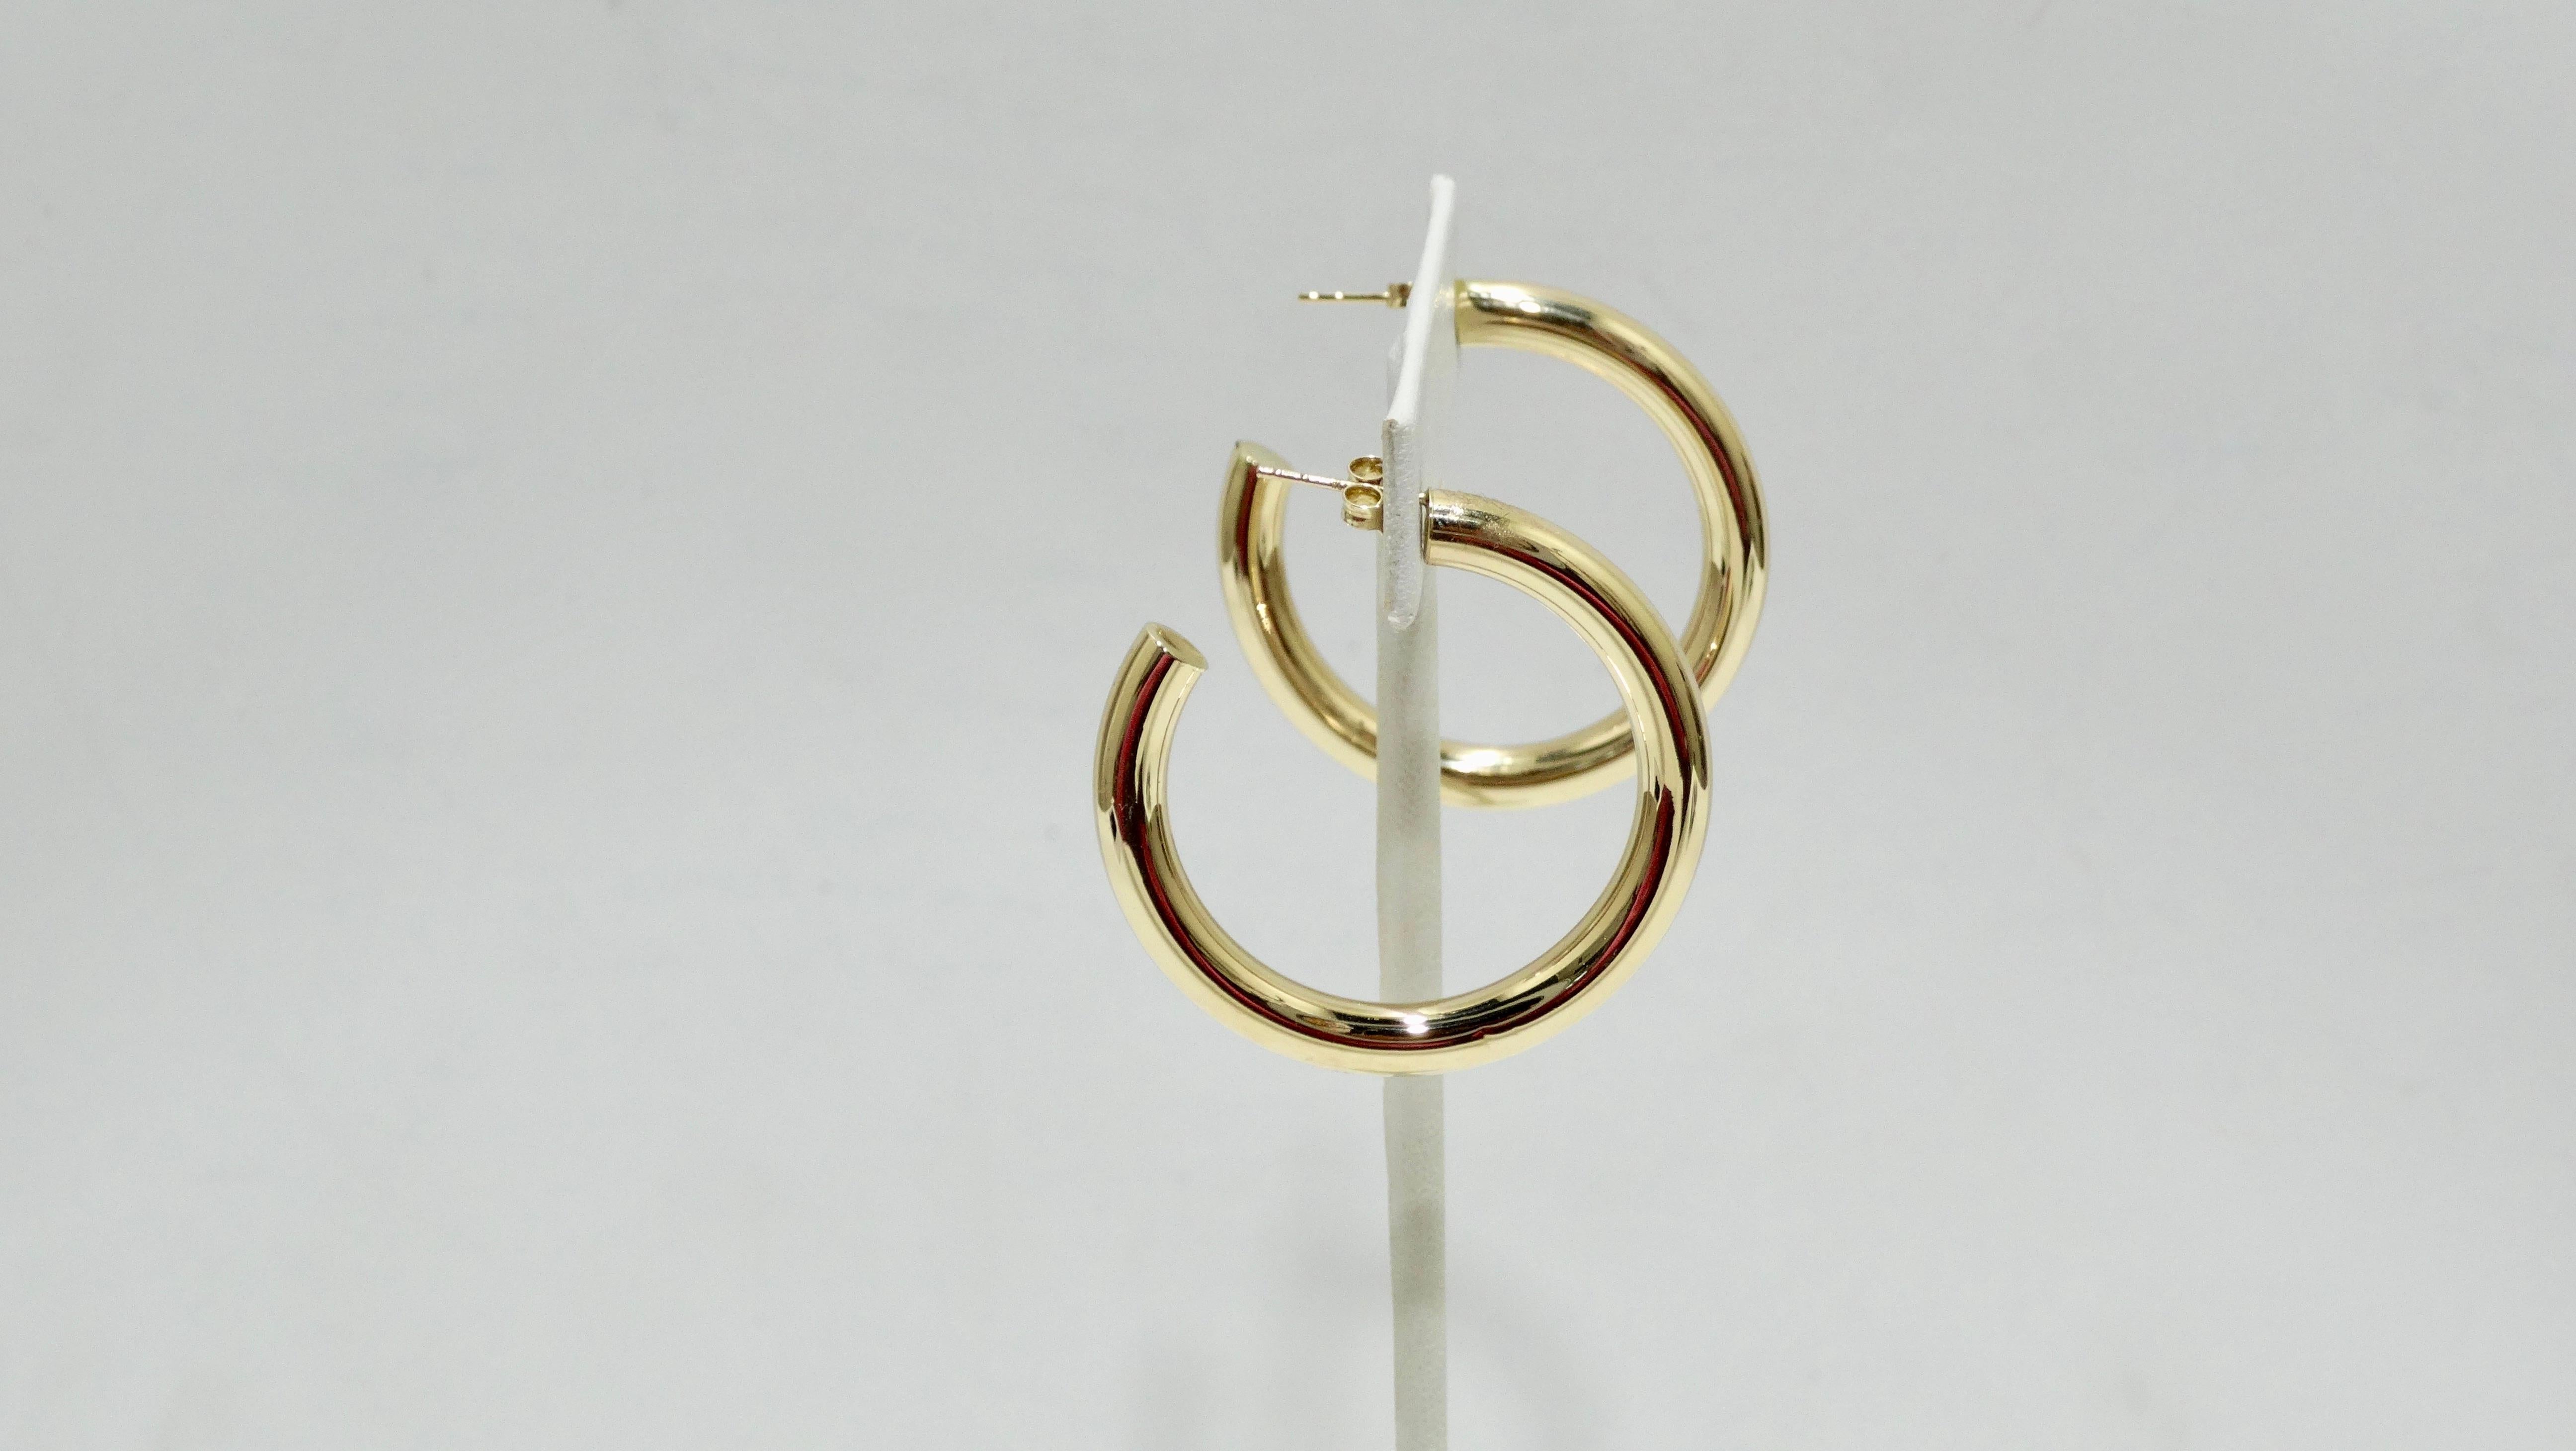 The perfect go-to earrings for your collection! Crafted from 14k gold, these thick banded gold hoops have pierced backs and are stamped 14k gold made in Turkey. Comes with original box and dust bag. Perfect to pair with all your Gucci, Chanel, and